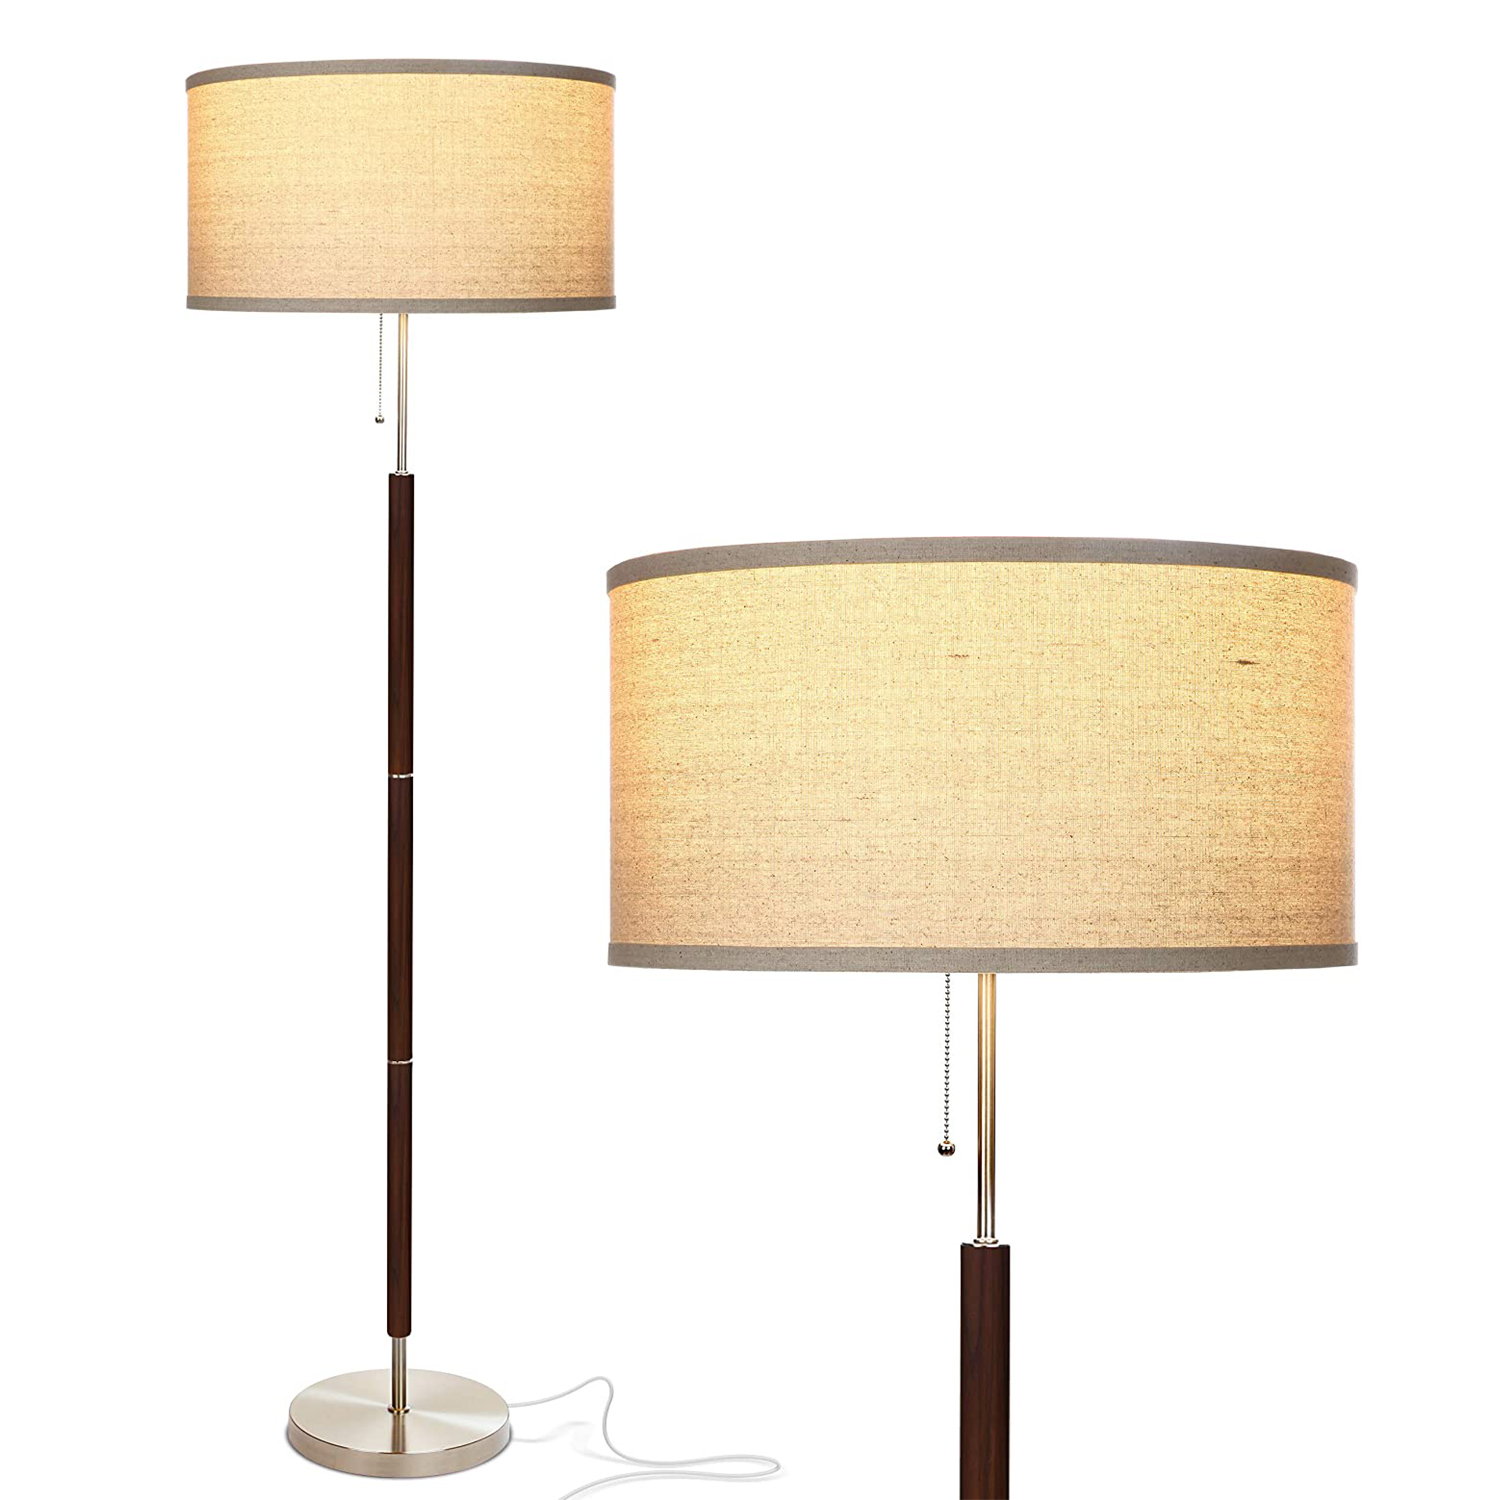 Floor lamp with fabric shade